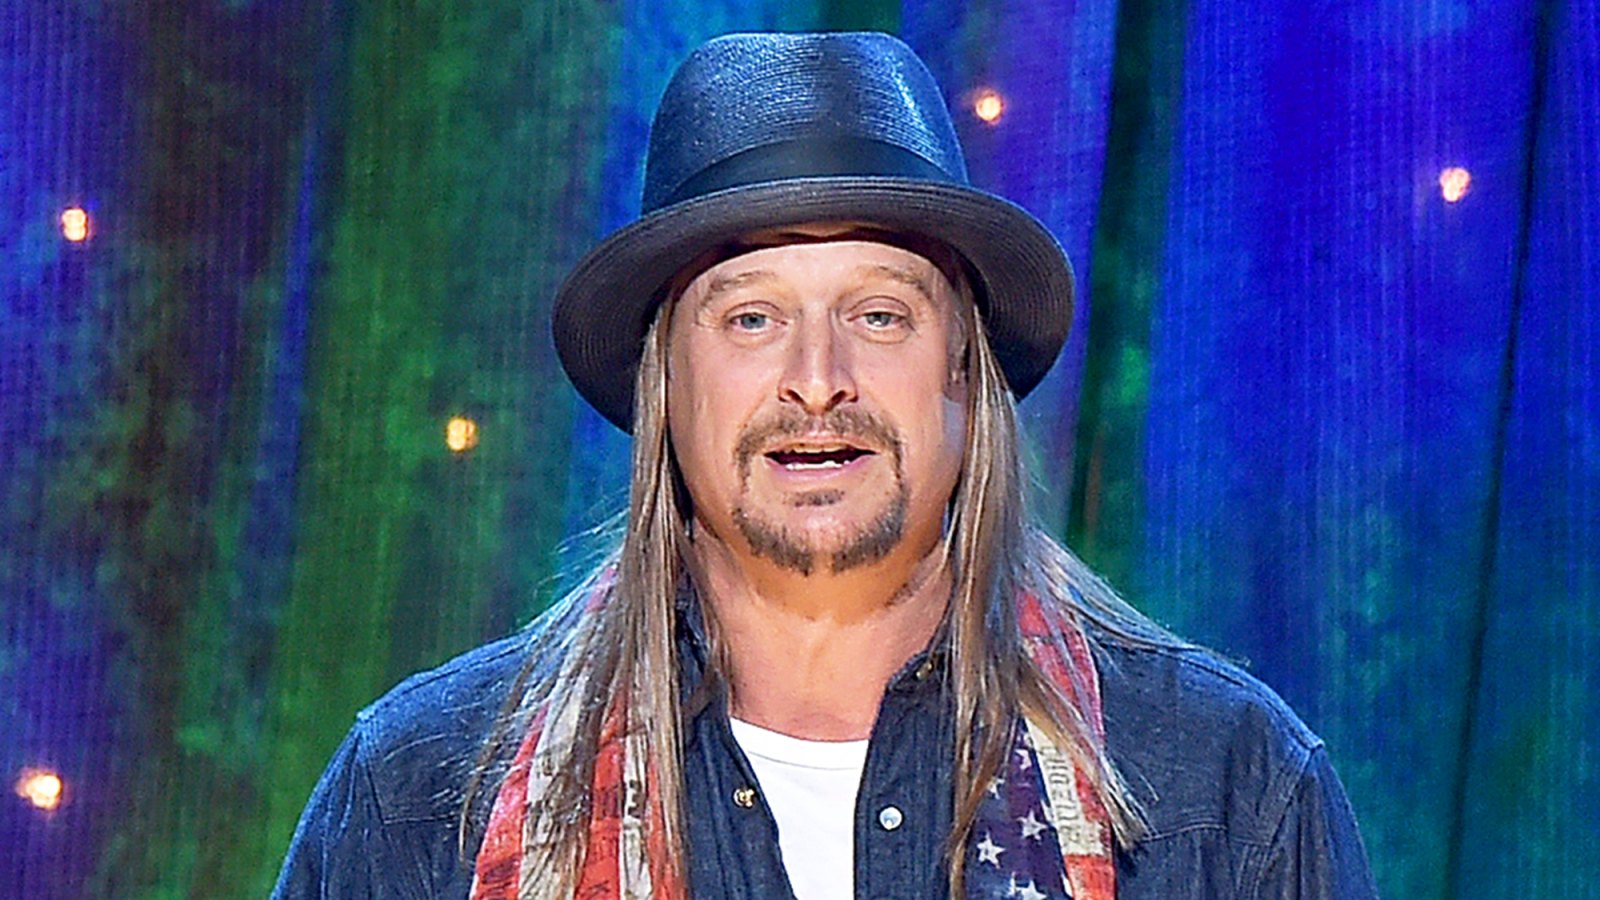 Kid Rock attend the 31st Annual Rock And Roll Hall Of Fame Induction Ceremony at Barclays Center on April 8, 2016 in New York City.